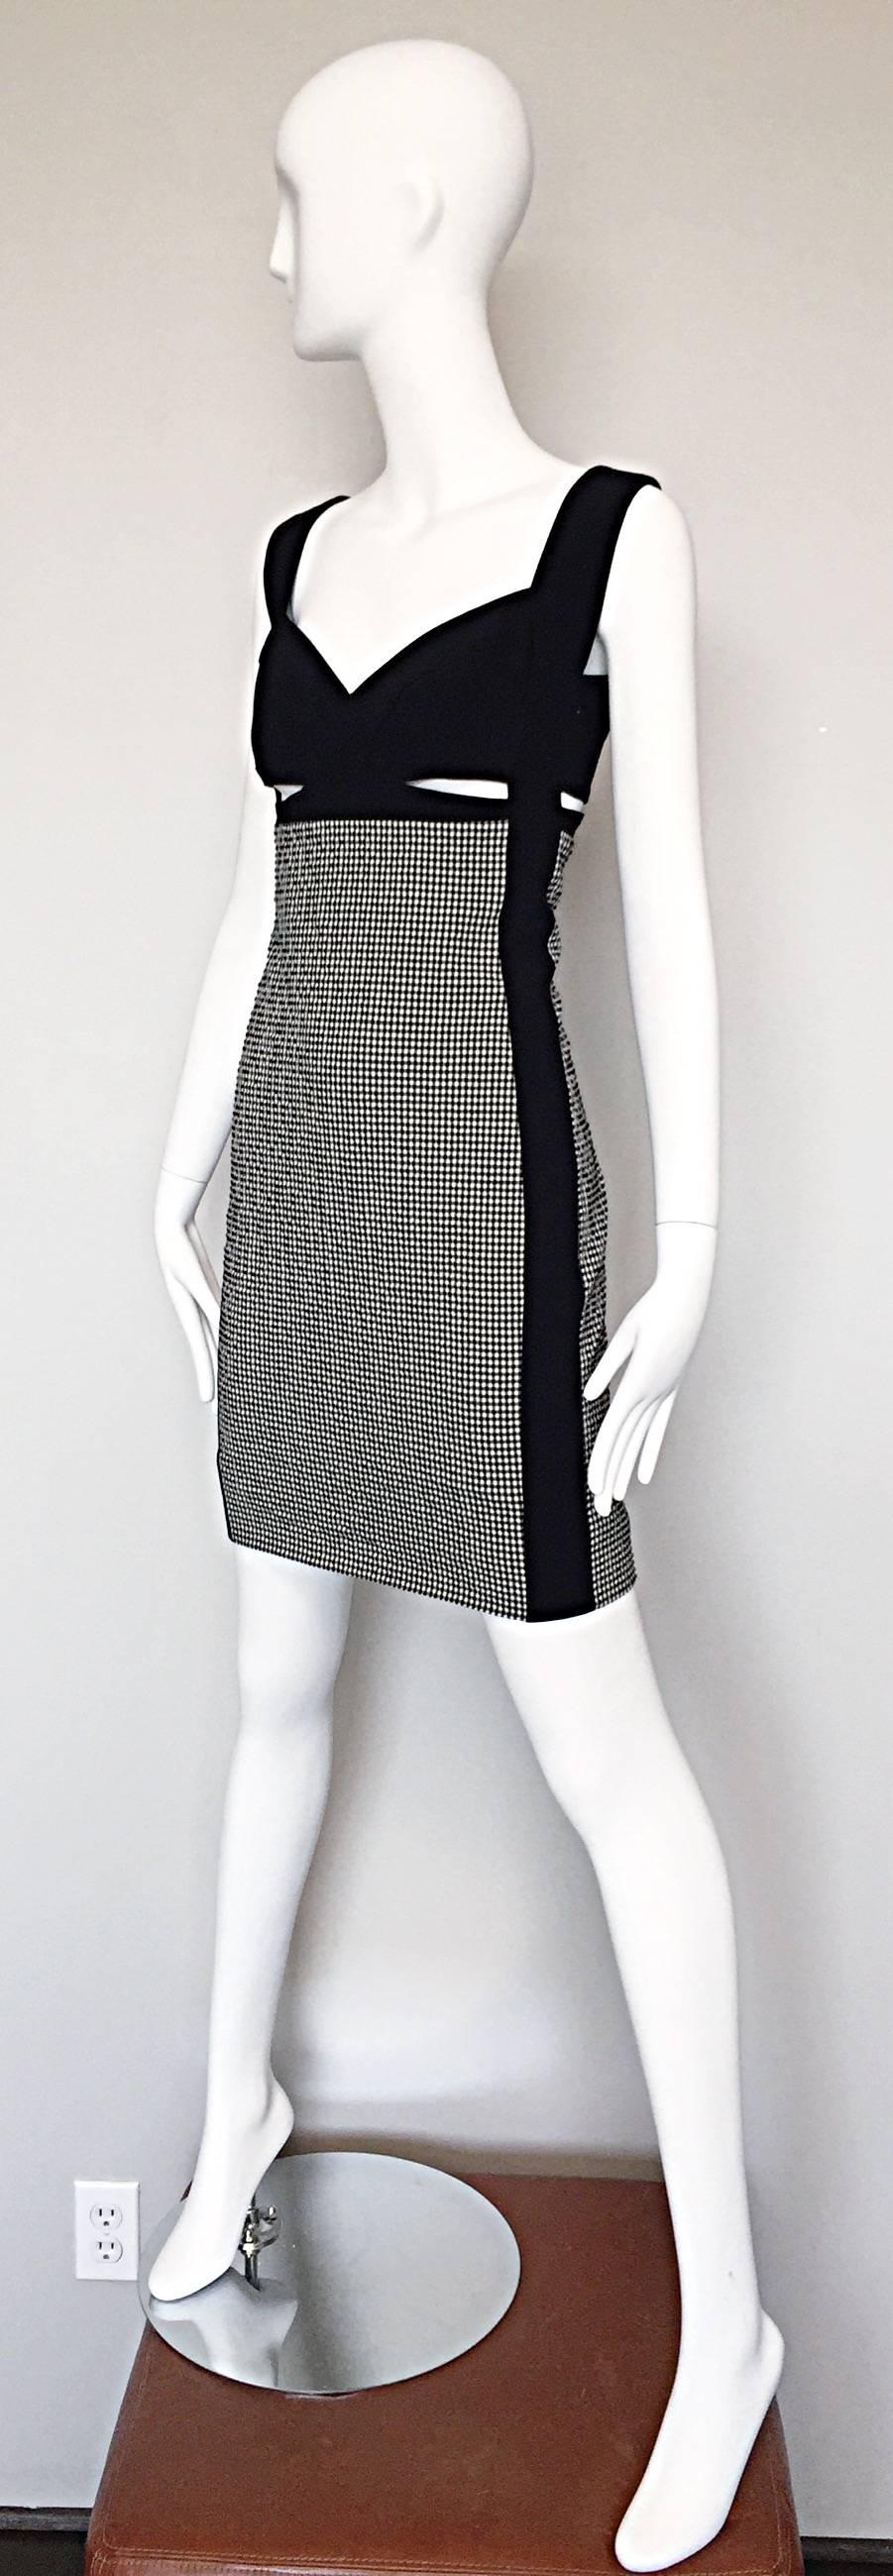 Narcisco Rodriguez Black and White Gingham Cut - Out Runway Dress Size 42 / 6 In New Condition For Sale In San Diego, CA